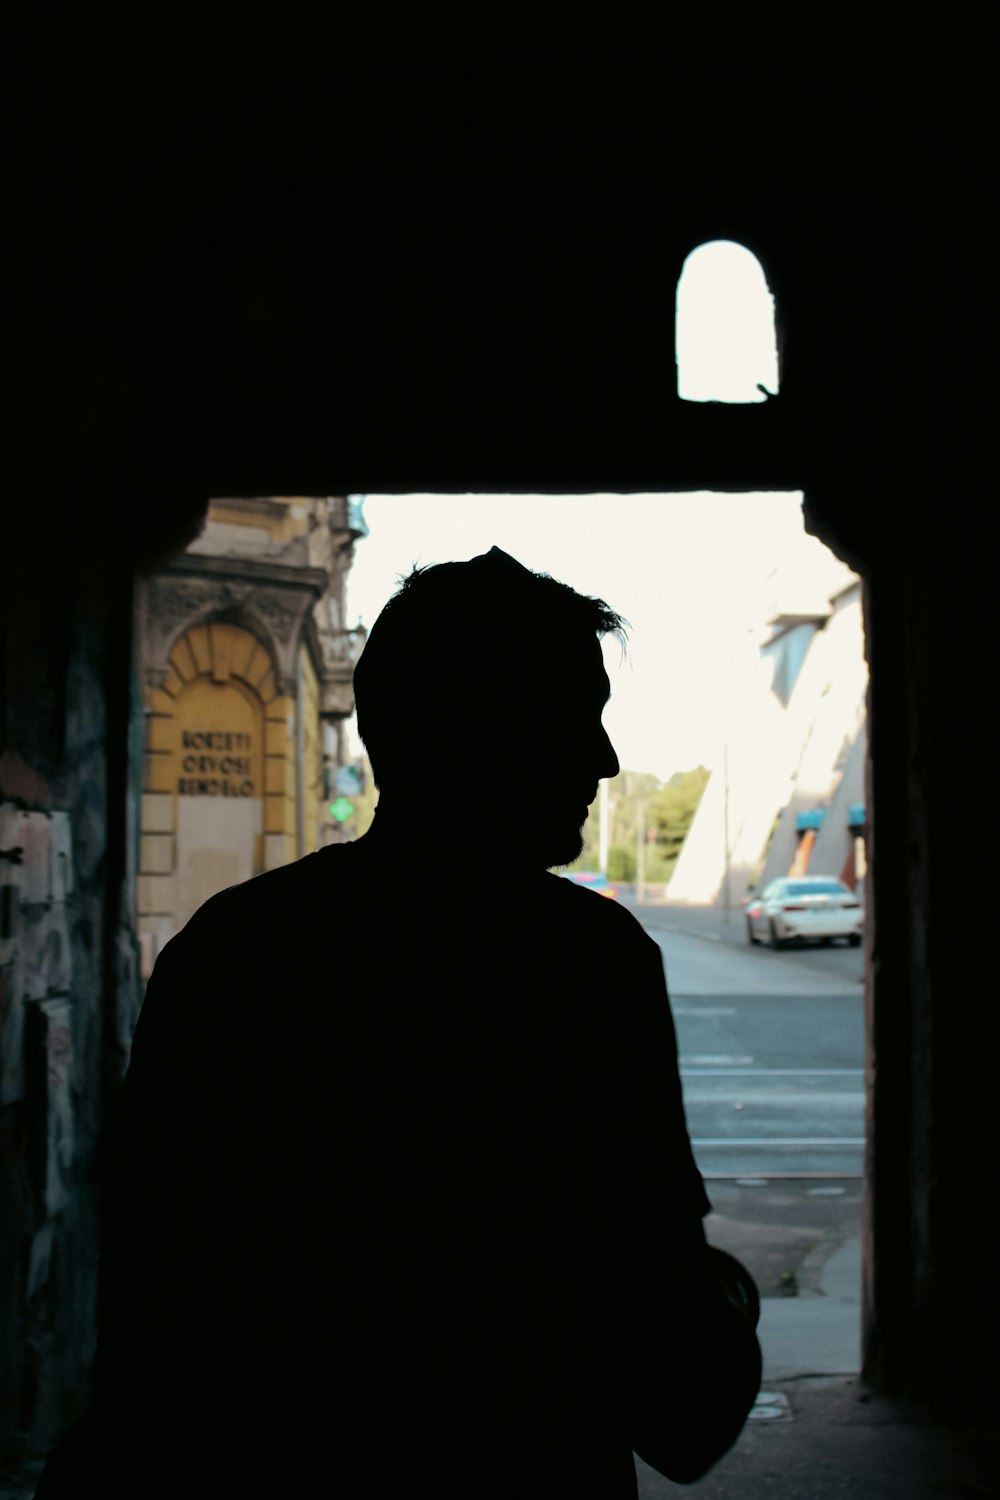 a silhouette of a man standing in a tunnel